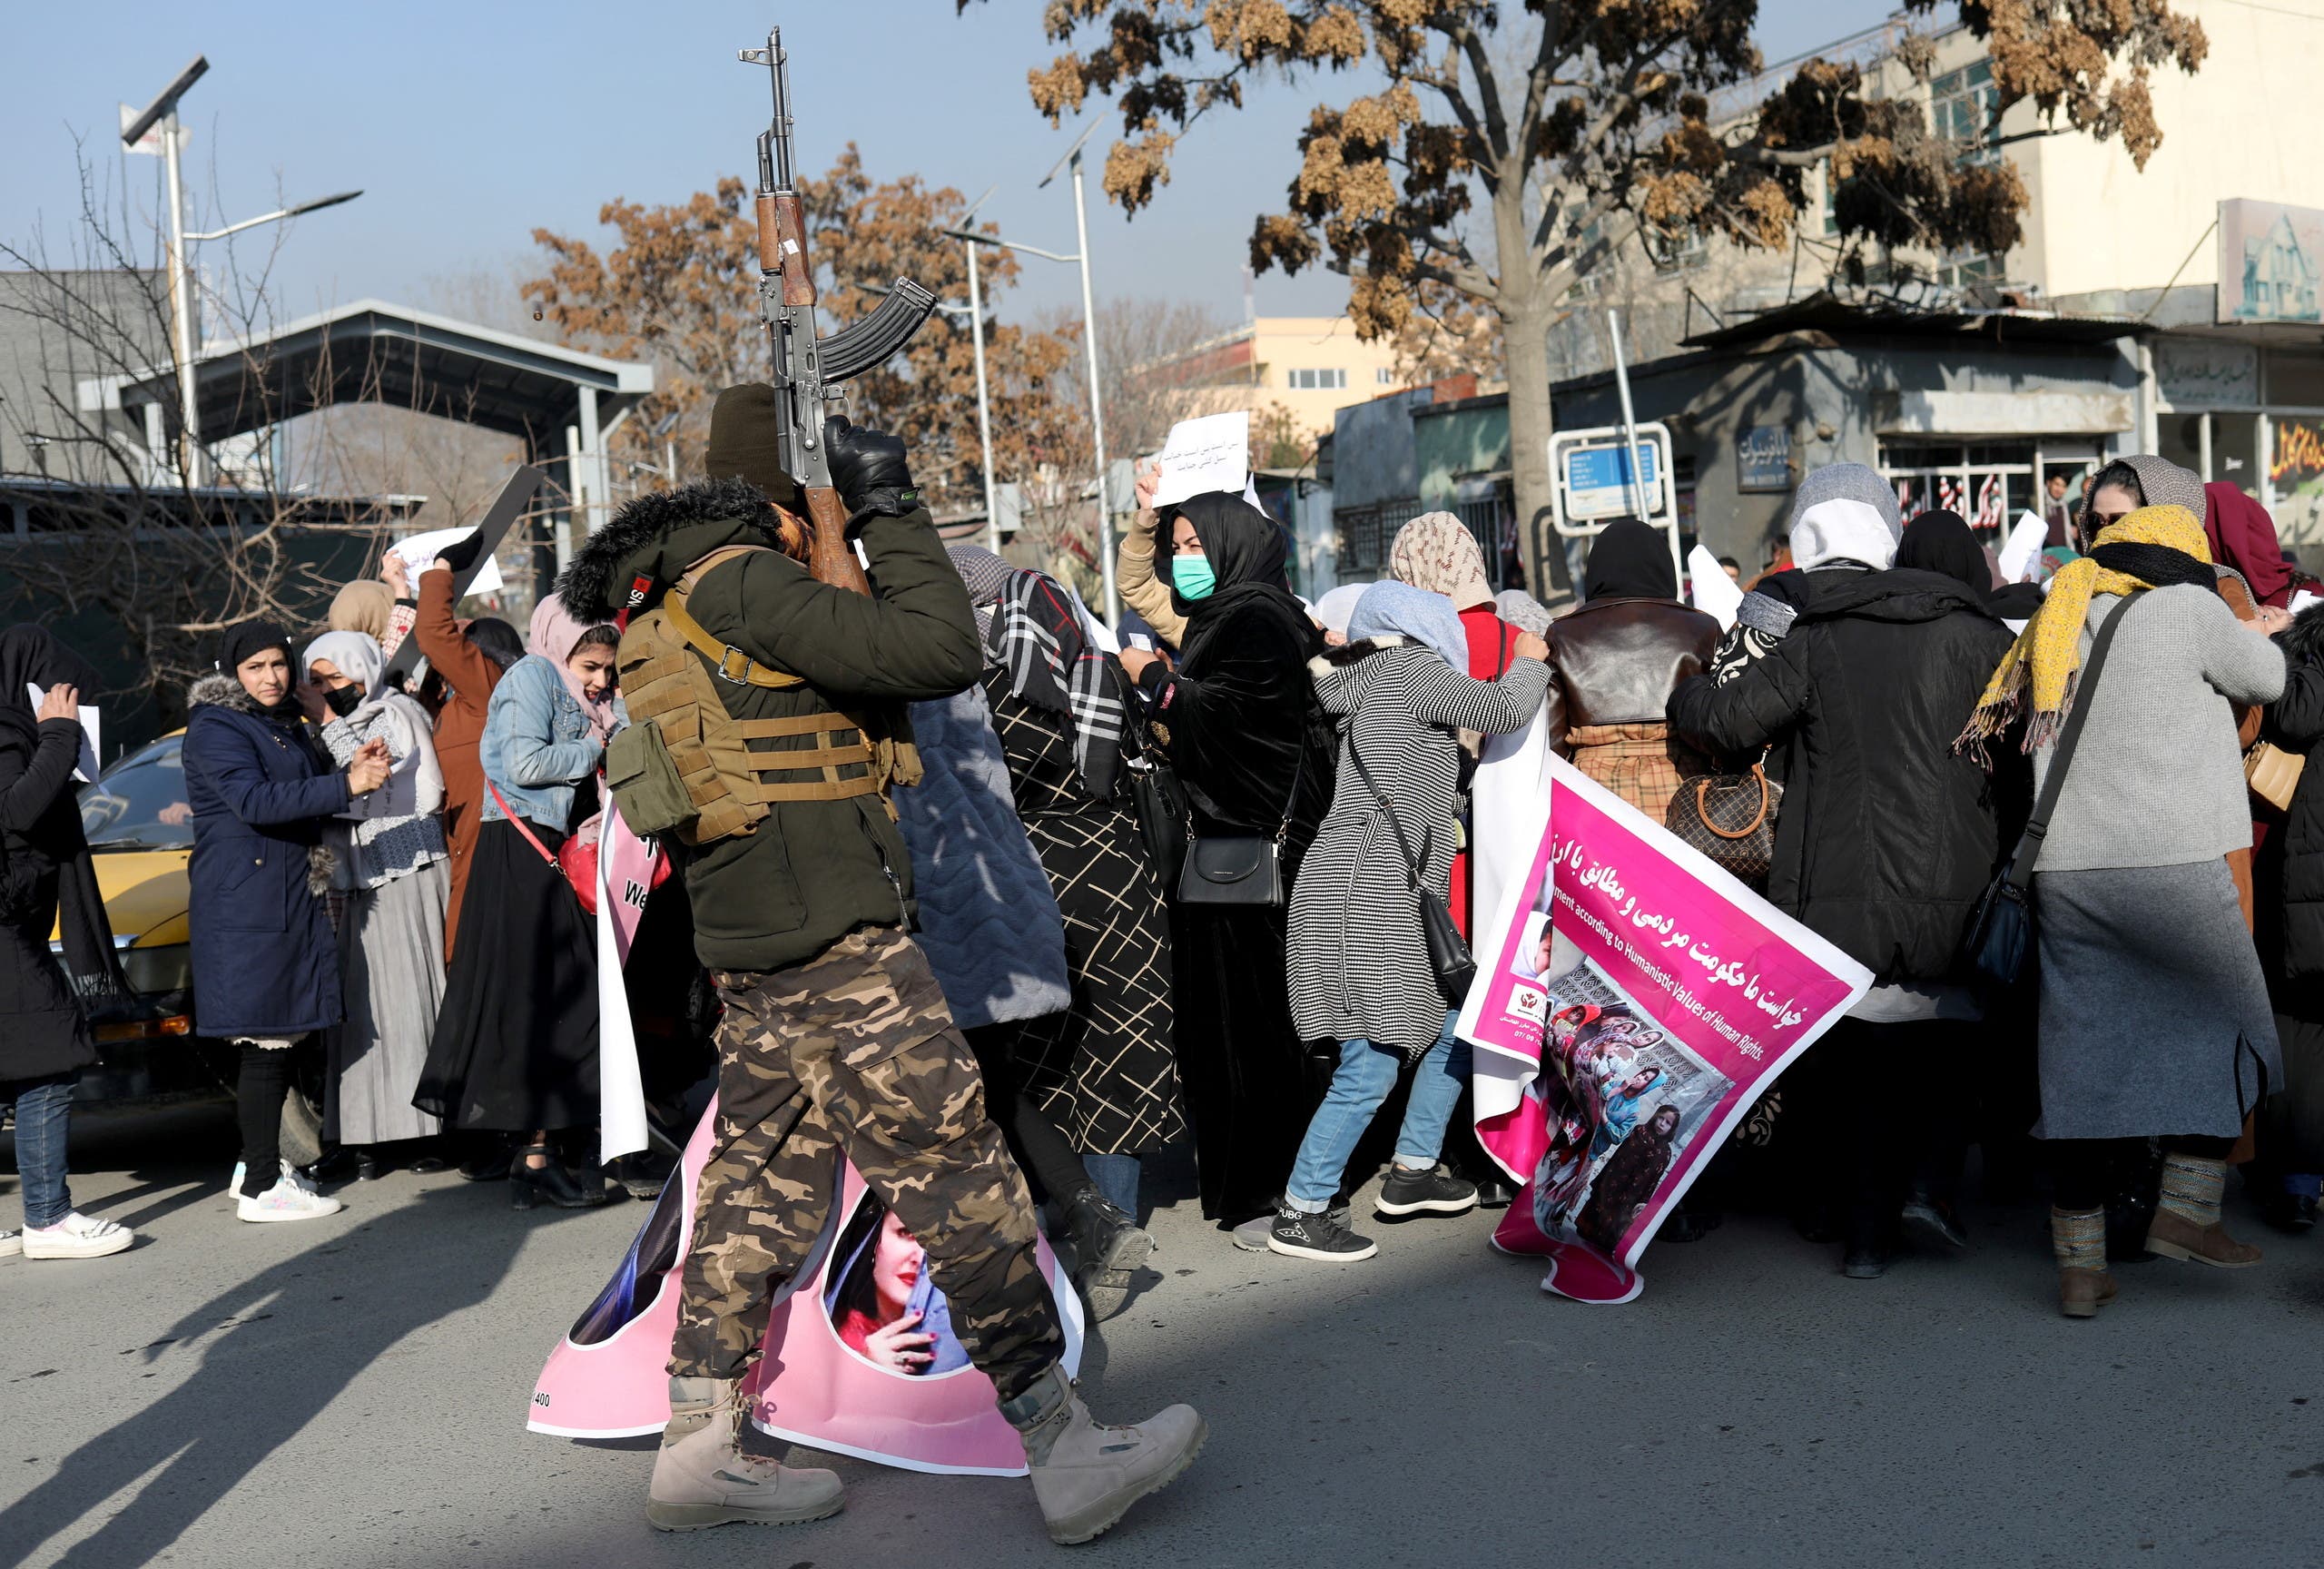 Taliban security attacks a women's demonstration in December 2021 (Reuters)